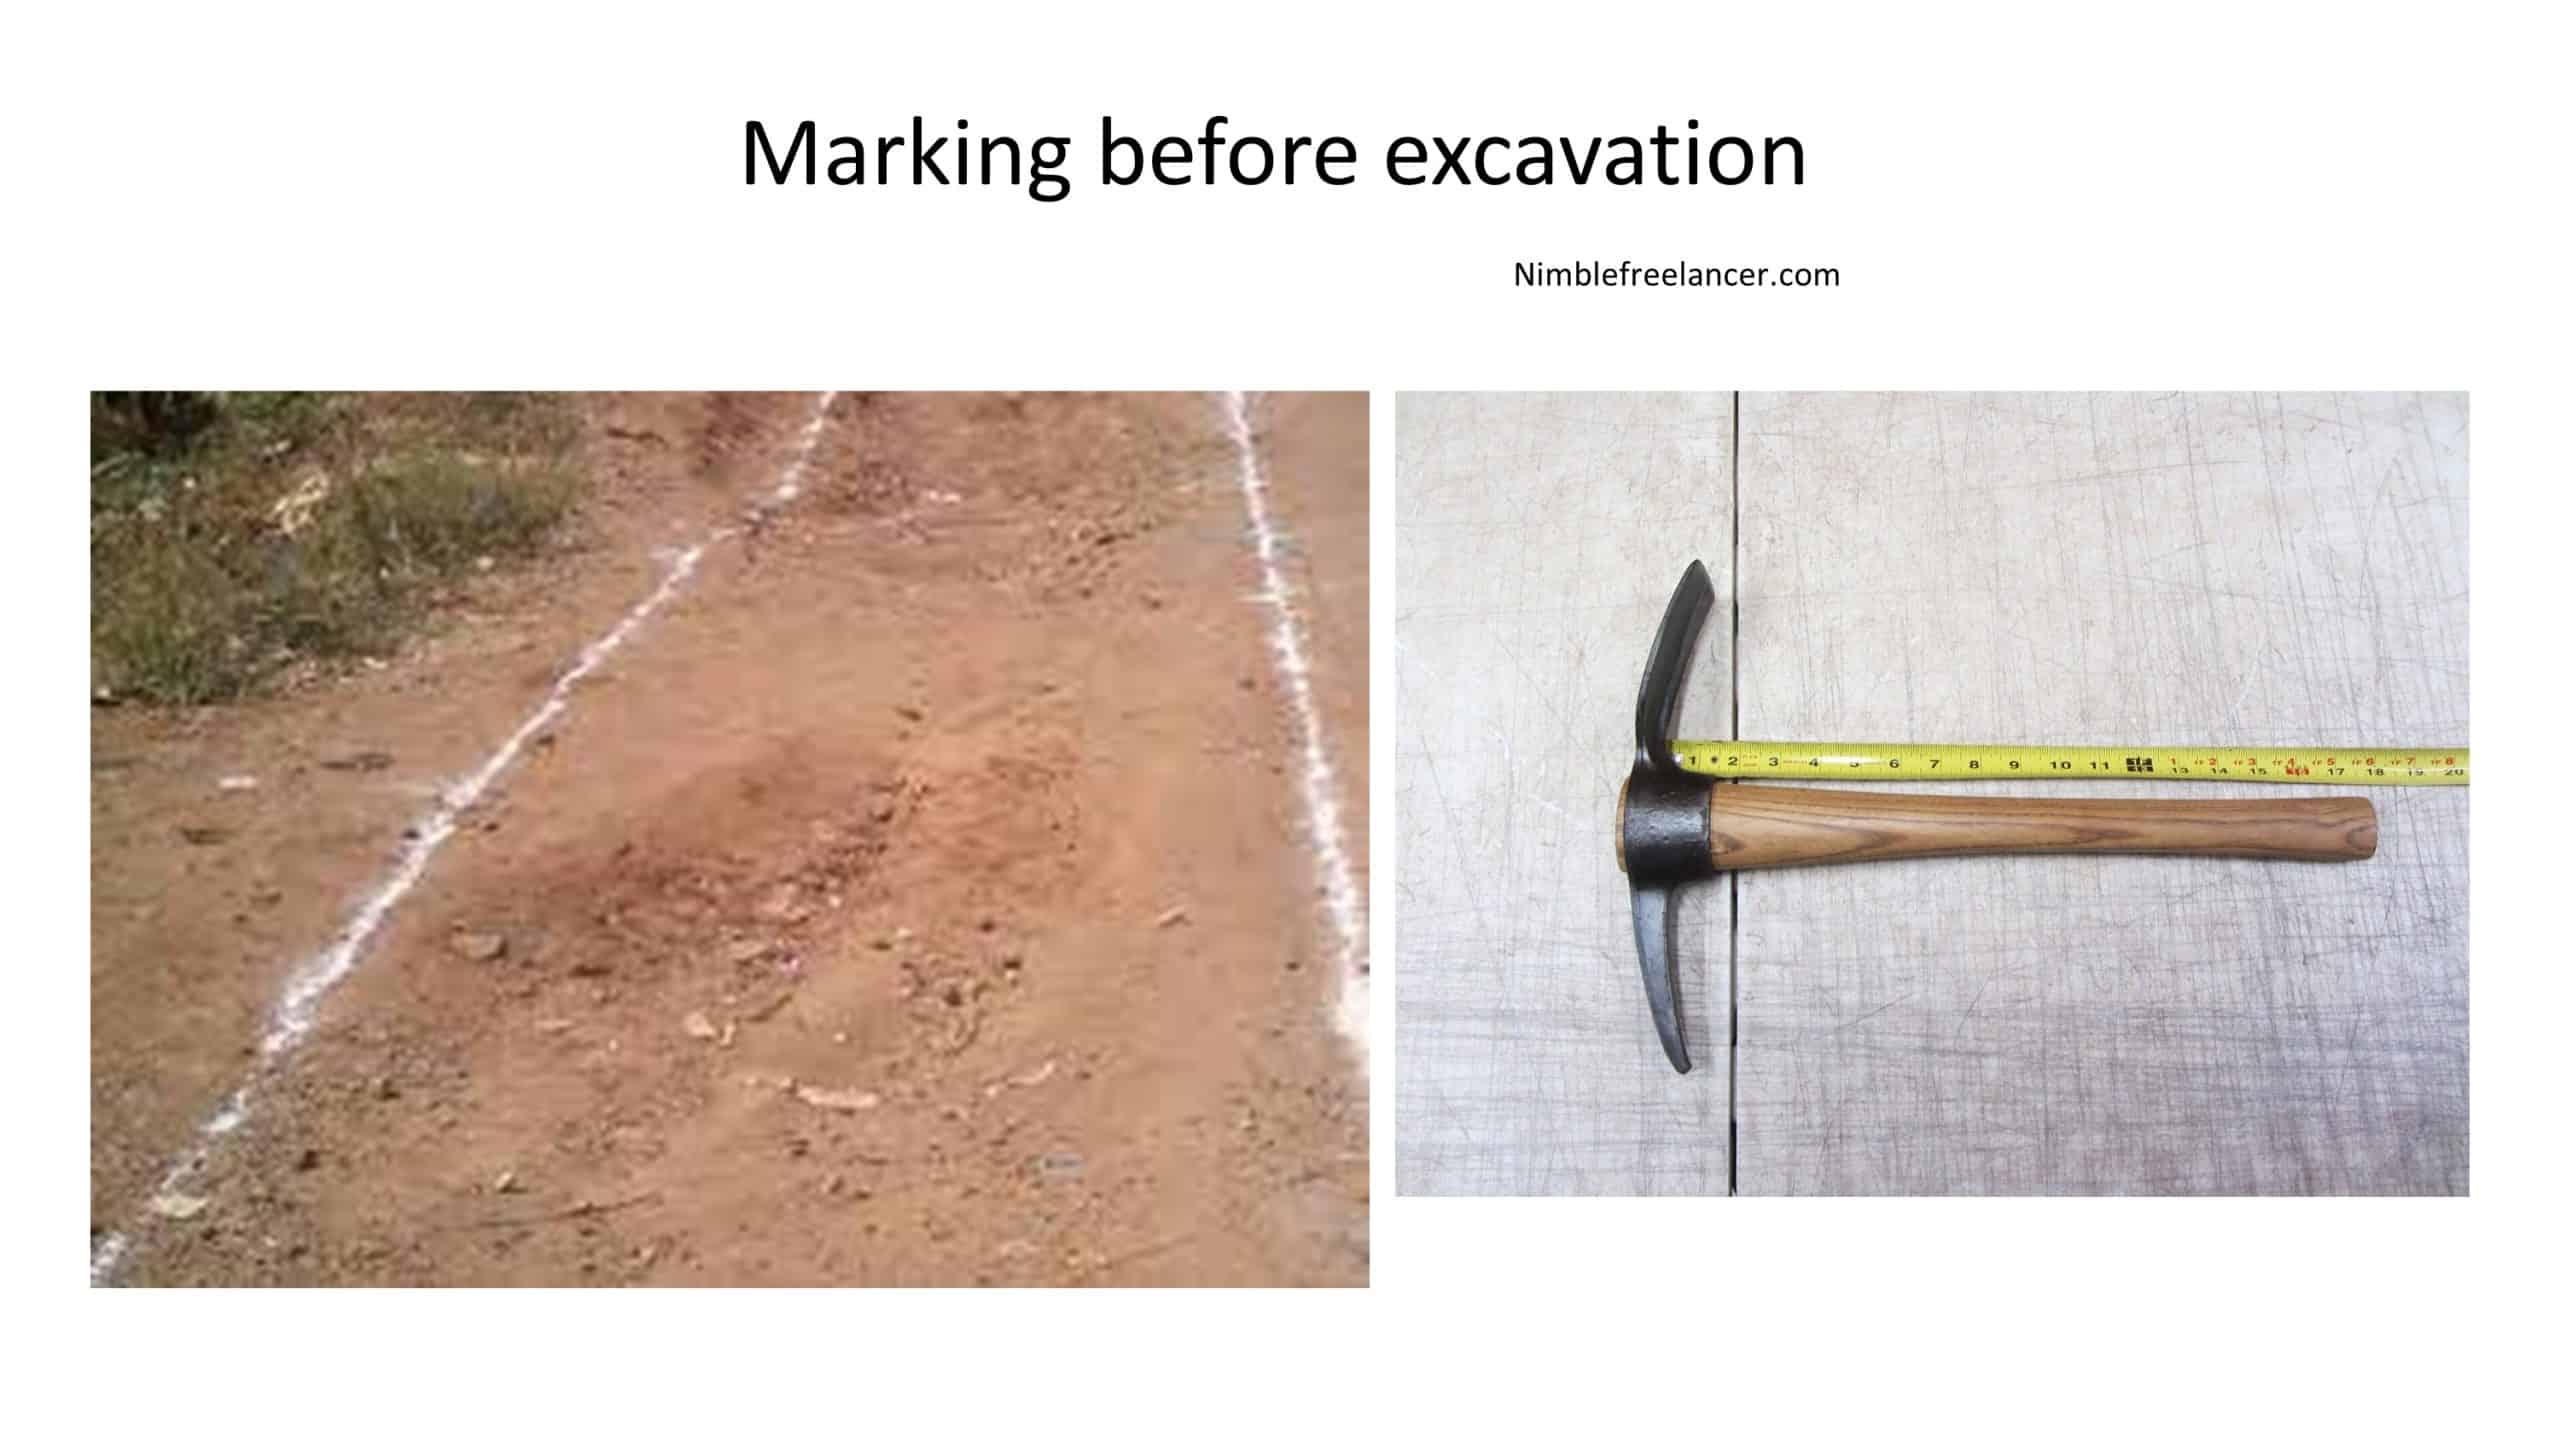 tools for marking before excavation